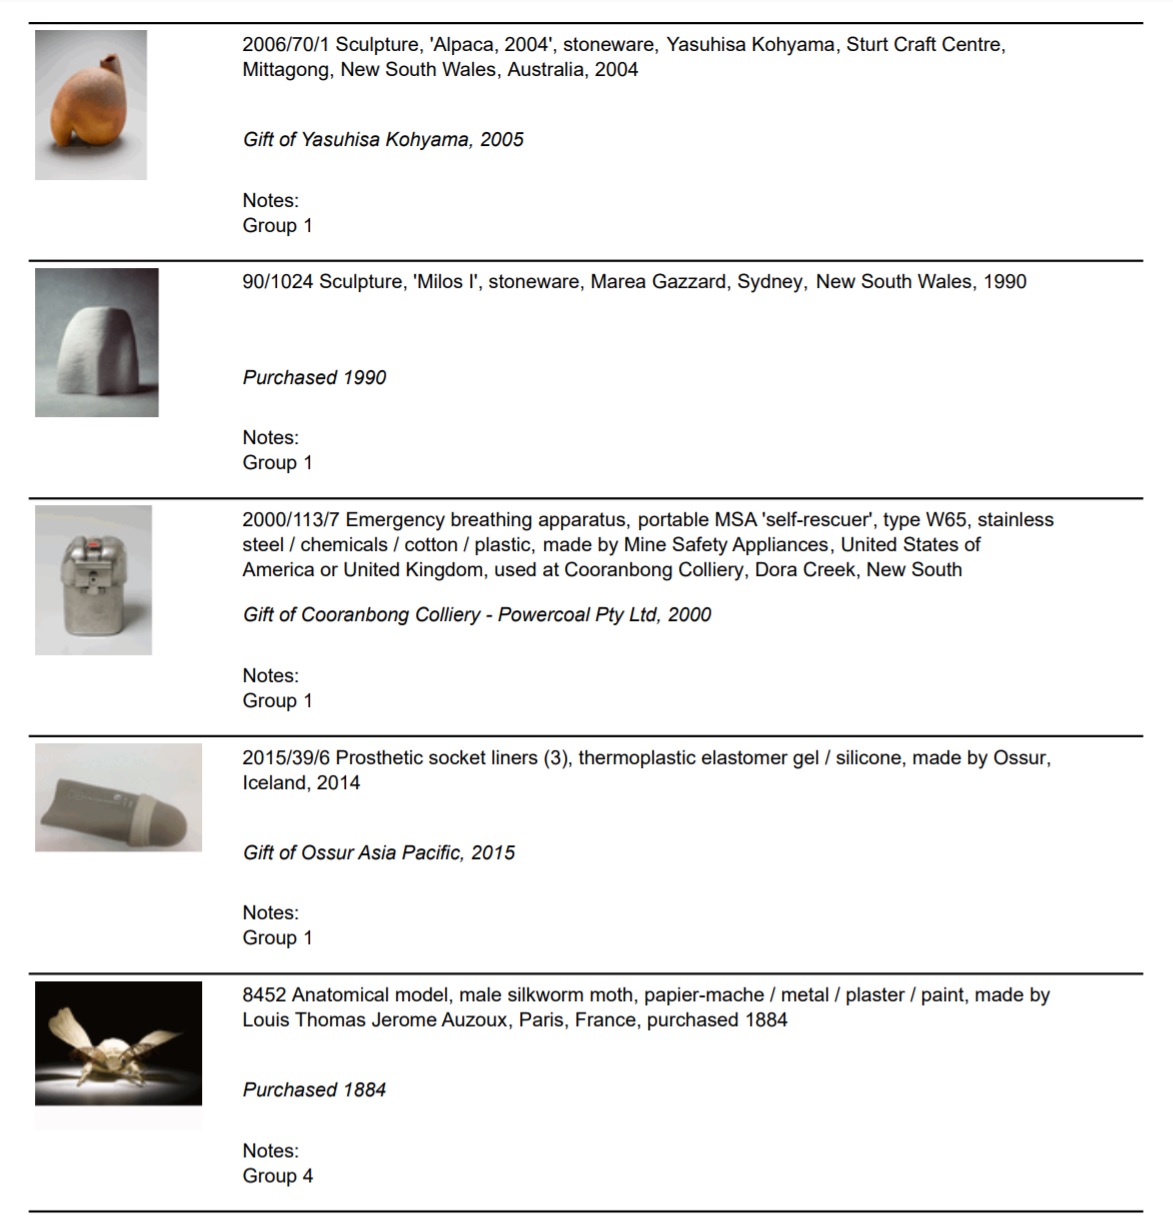 A screenshot of a pdf showing a sample from the object list in the format for distribution amongst the project team. The pdf shows an image, object details and source/credit line information for 5 objects including ceramic artworks, an emergency breathing apparatus, a silicone prosthetic socket liner and an anatomical model of a silkworm moth